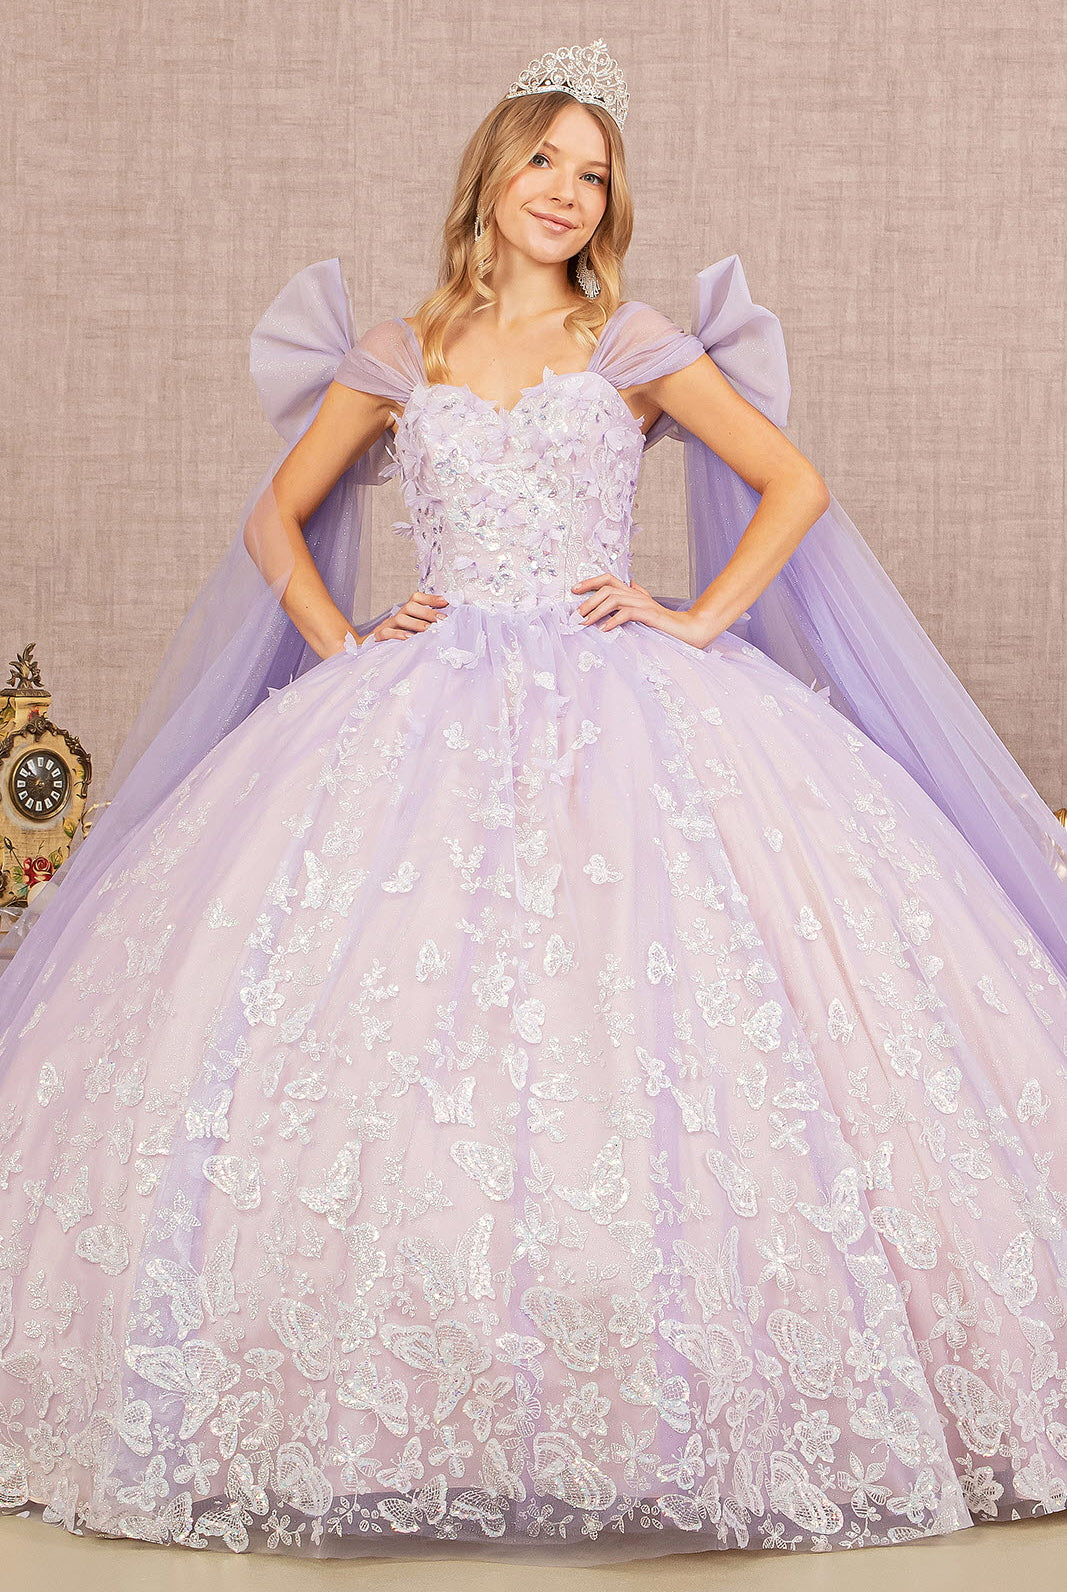 Jewel Glitter Quinceanera Gown Long Mesh Layer and Ribbons GLGL3175-QUINCEANERA-smcfashion.com